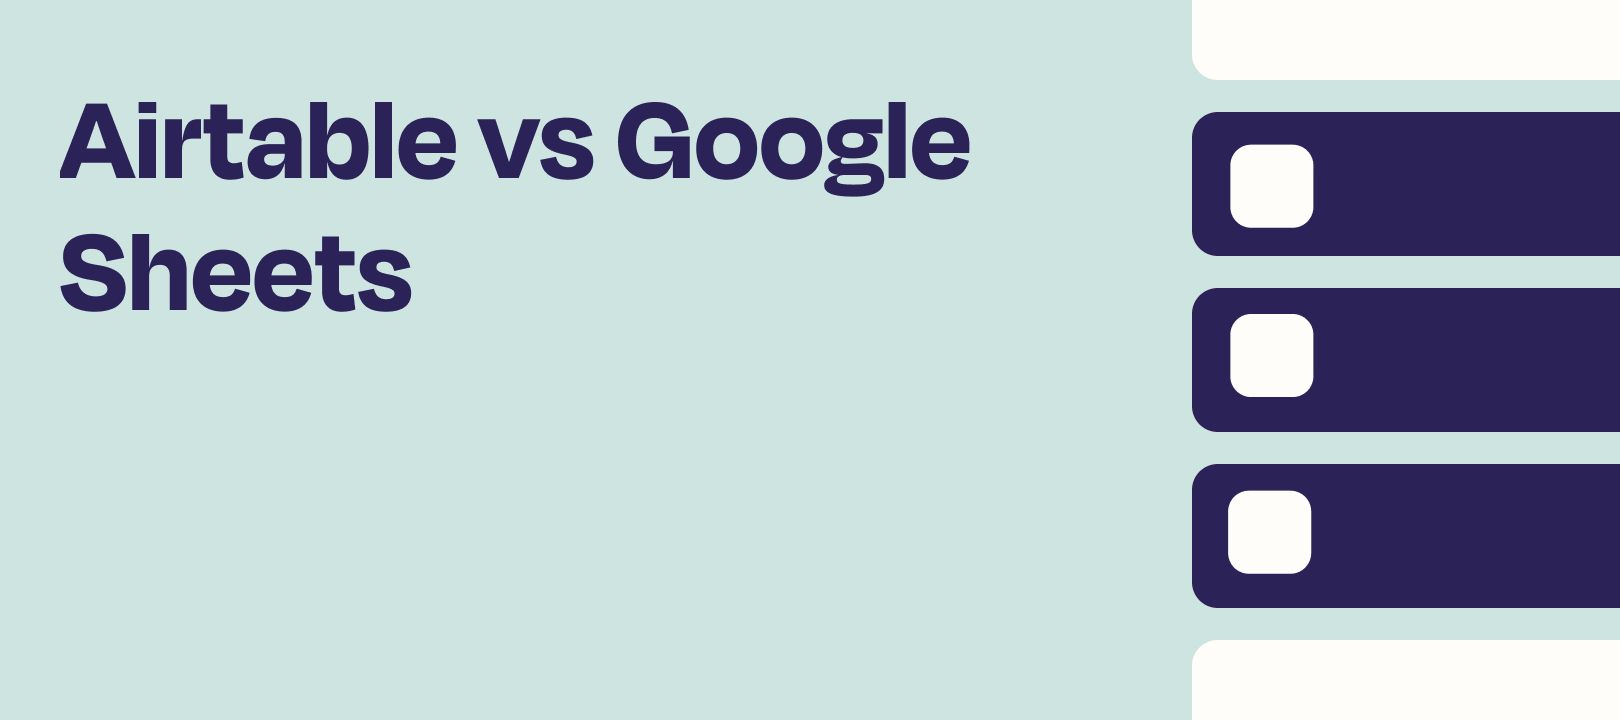 Airtable vs. Google Sheets - How To Determine Which Is Best For Your Use Case